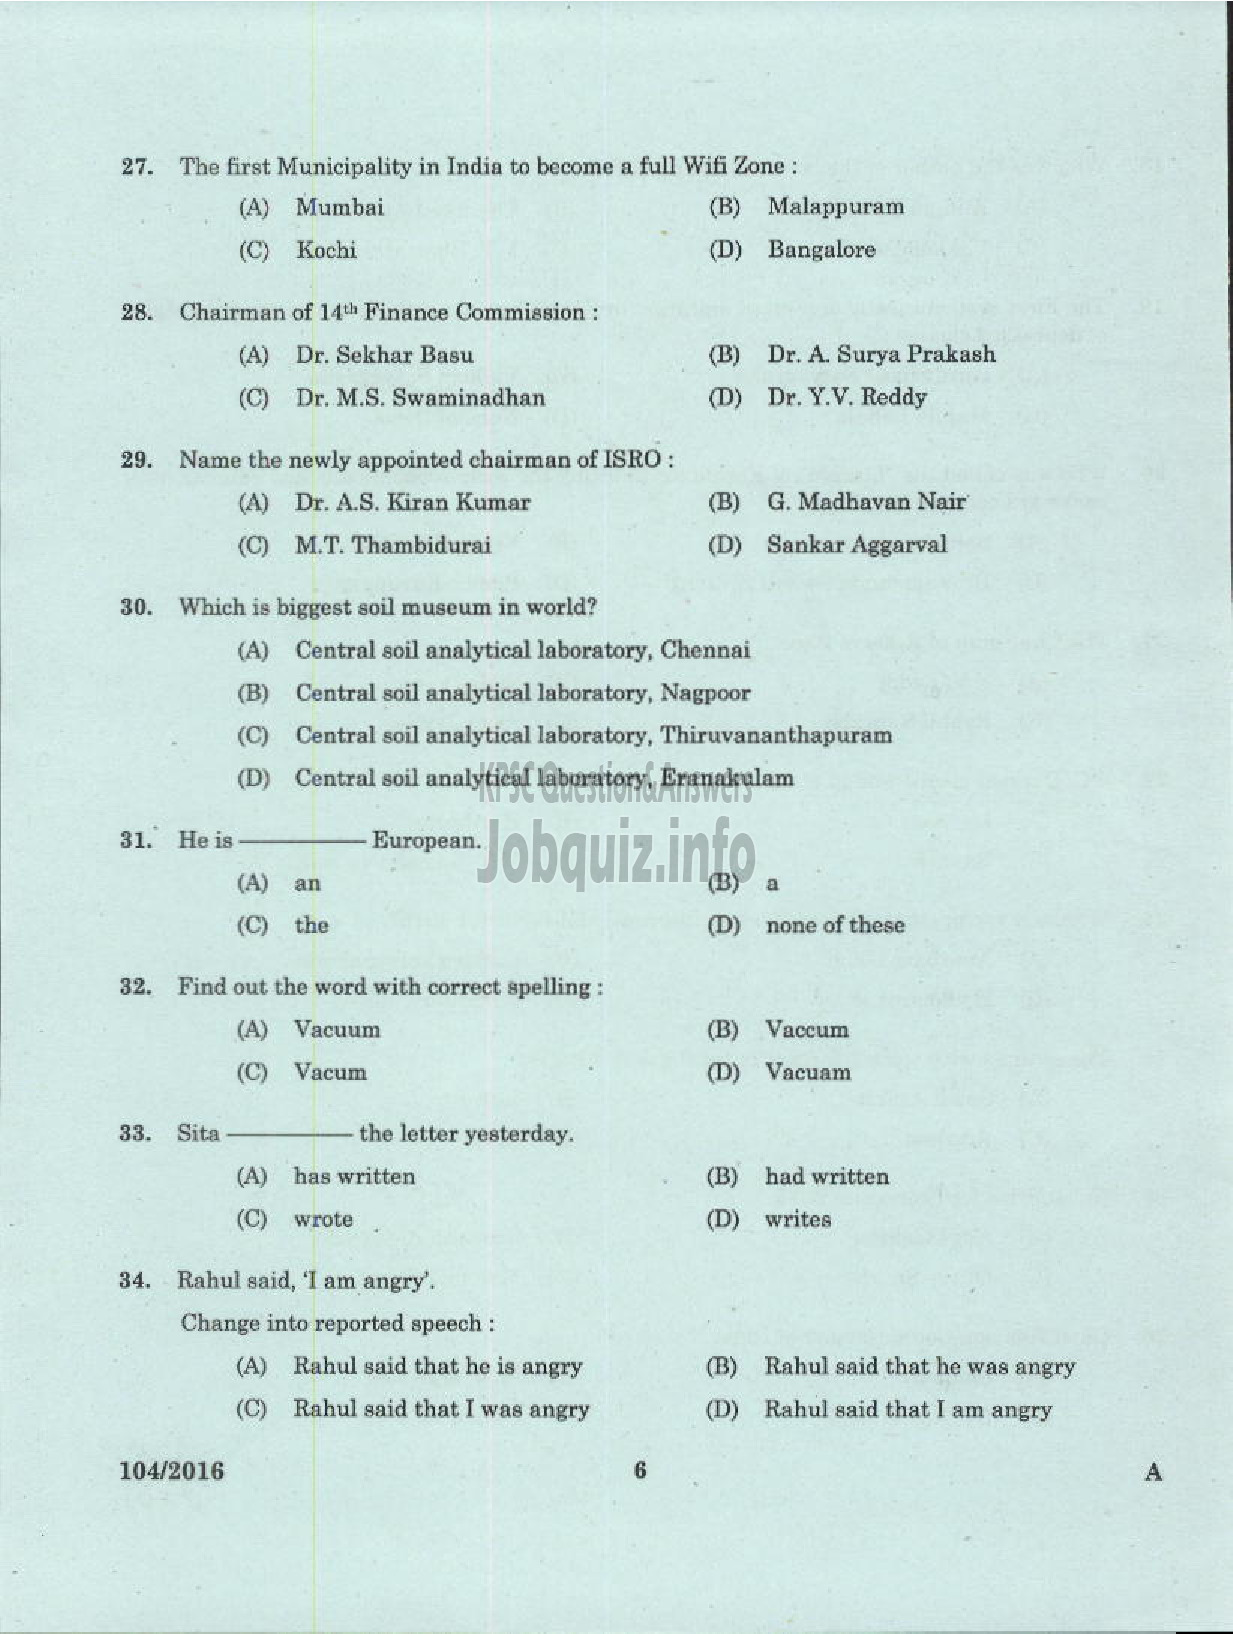 Kerala PSC Question Paper - CONFIDENTIAL ASSISTANT GR II VARIOUS/ GOVT OWNED COMPANY/CORPORATIONS/BOARDS-4